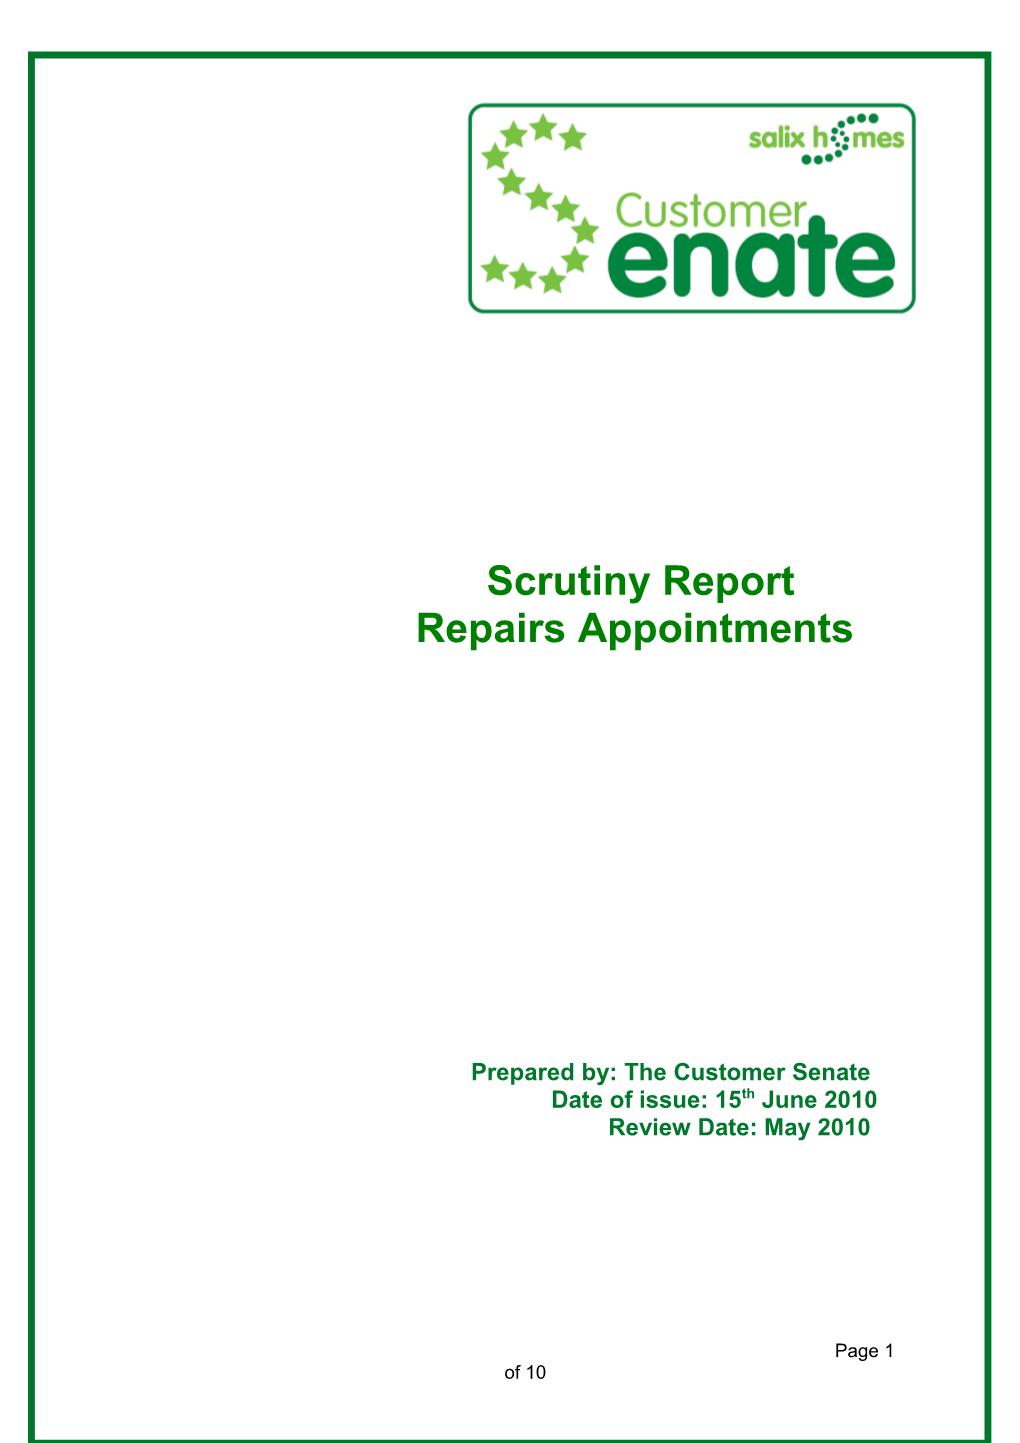 1.1.The Customer Senate Adopted a Criteria for Scrutiny Based on the Following